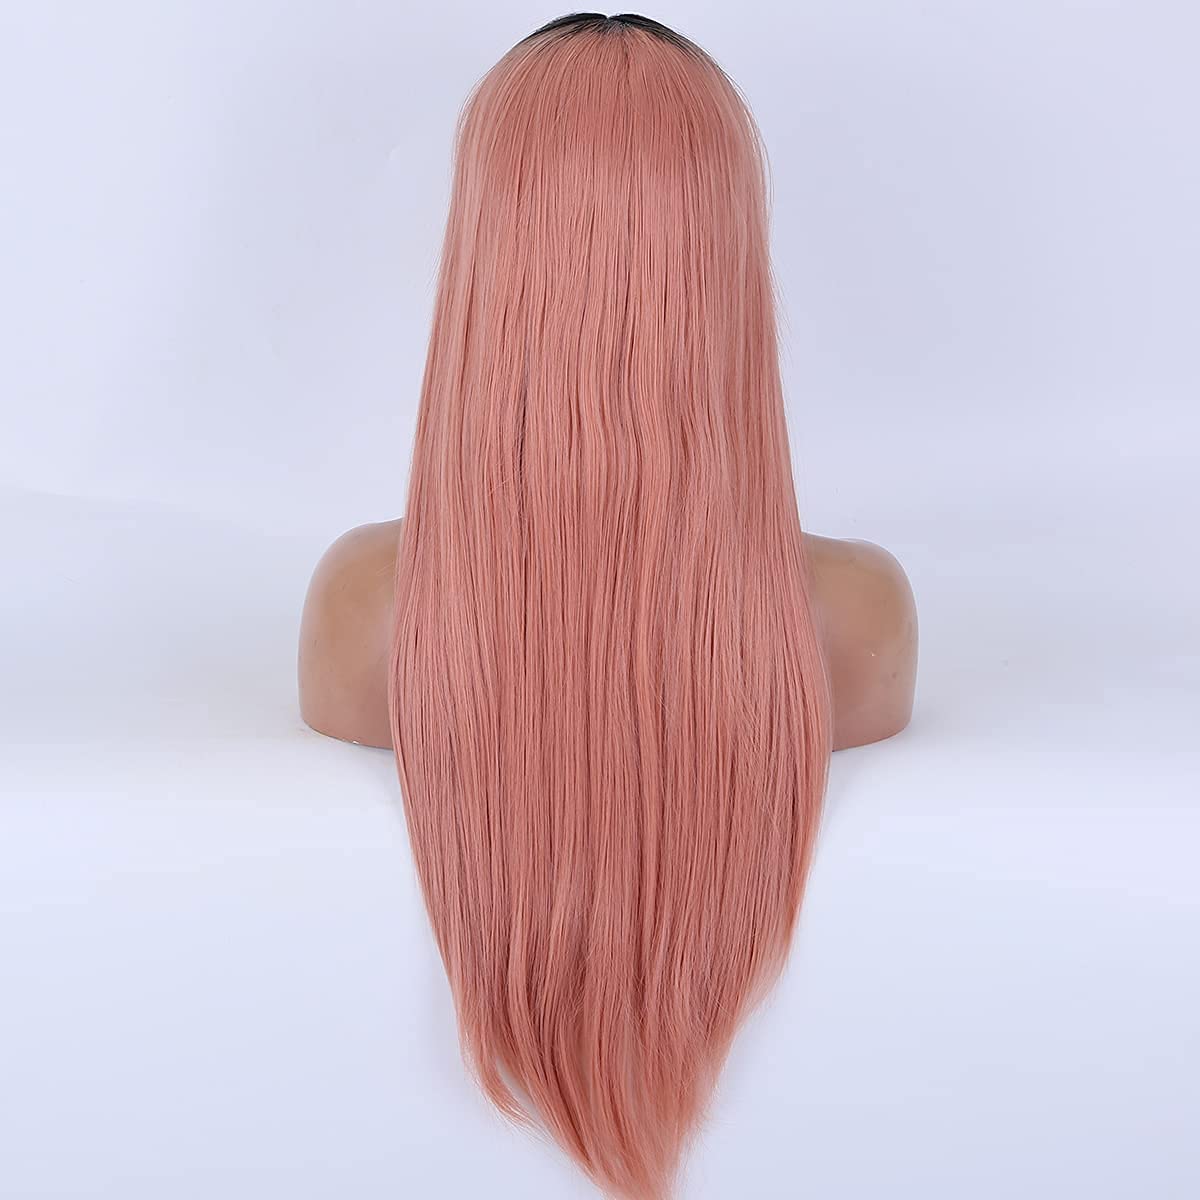 13×4 Long light Pink Straight Wig,Ombre Pink Lace Front Wig,pink black hair,ombre hair color for black hair,ombre pink hair,pink wig,wigs,hot pink hair,pink hair inspiration,pink hair color,light pink hair,rose gold hair,rose gold costume hair,rose pink hair wigs,rose gold hair ombre,pink roots black hair wig,pink roots black hair wig black girl,pink and black hair black wig,Pink hair black,Pink root black hair wig,Black and pink hair black wig,pink hair lace front wig,pink roots on black wig